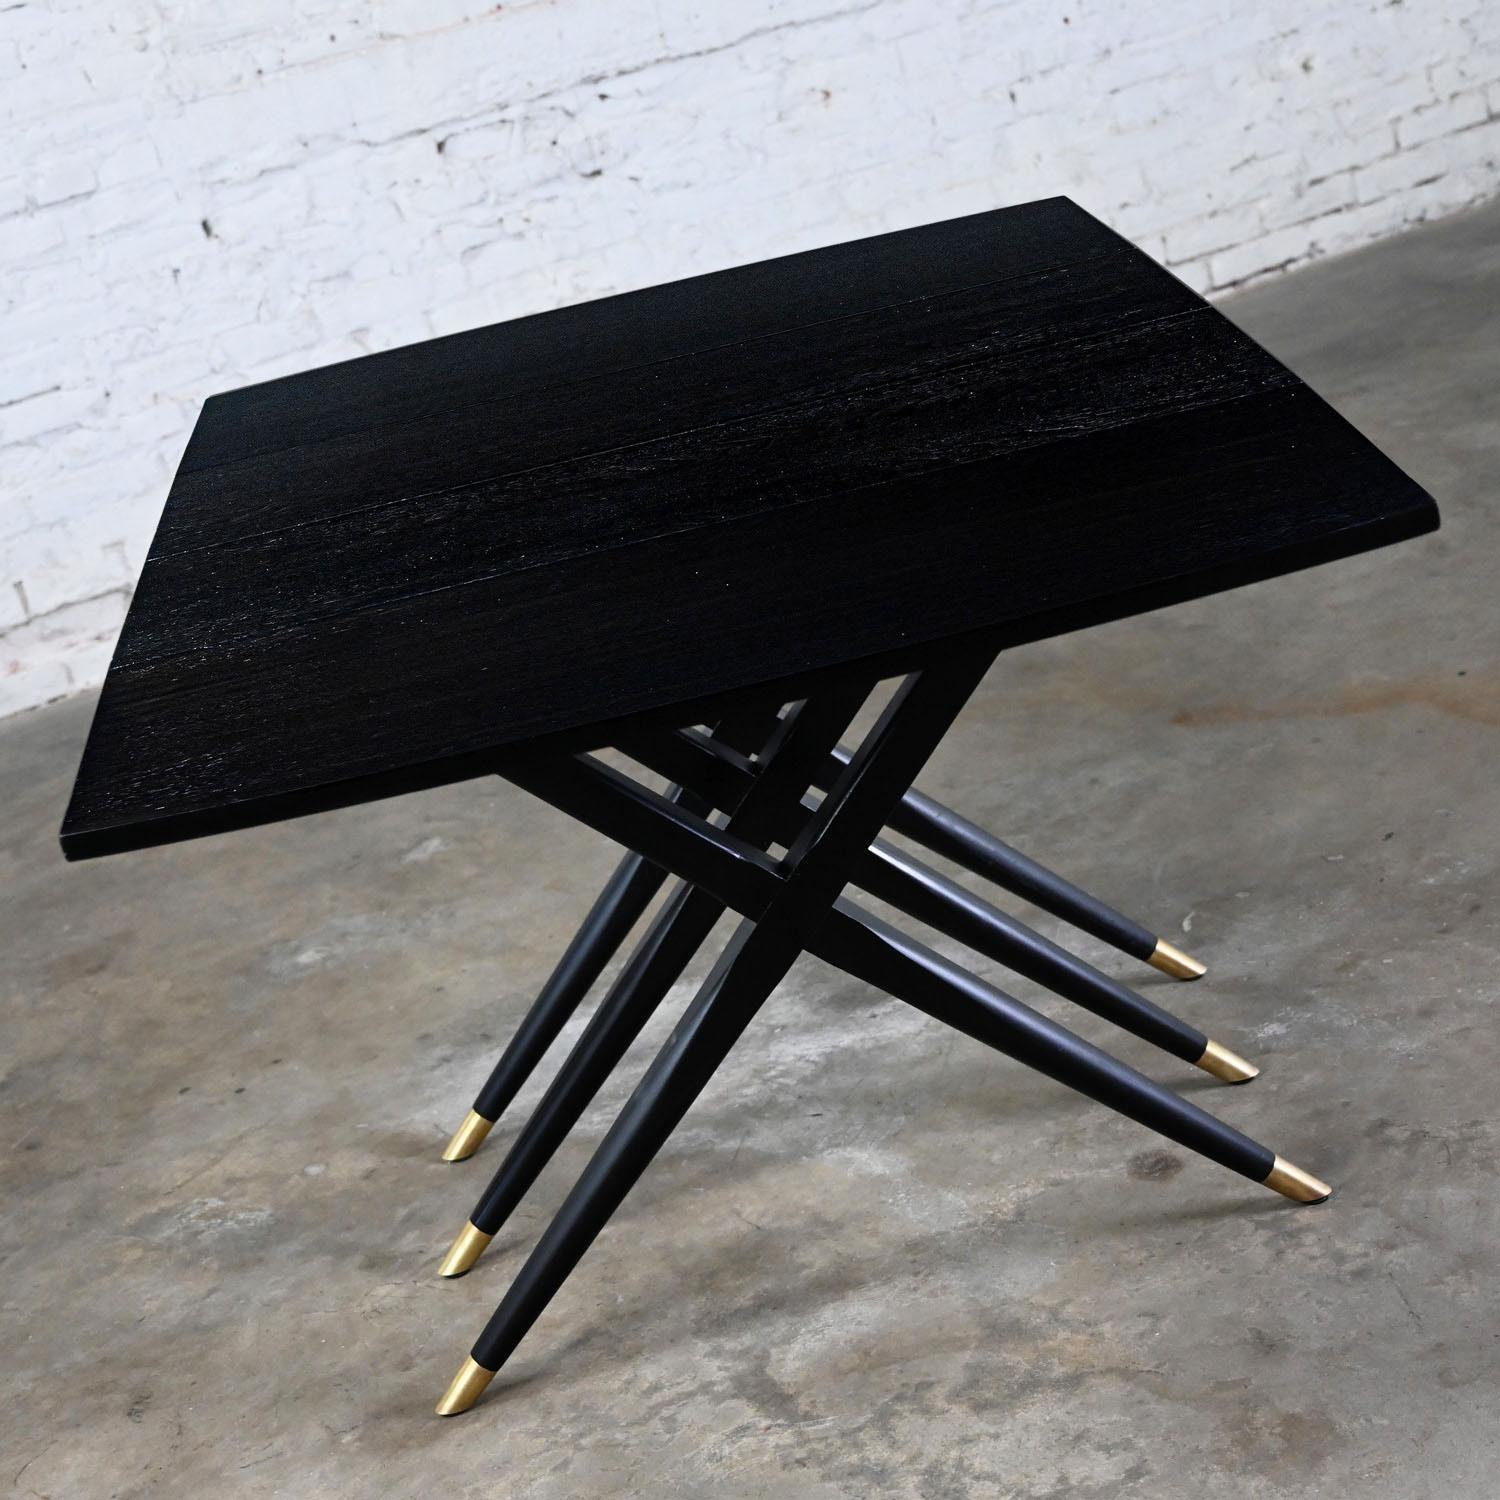 Handsome vintage MCM (Mid-Century Modern) with an Art Deco flair black dyed dining table with drop leaf feature & triple scissor leg base with brass sabots, by Craddock Furniture. Beautiful condition, keeping in mind that this is vintage and not new